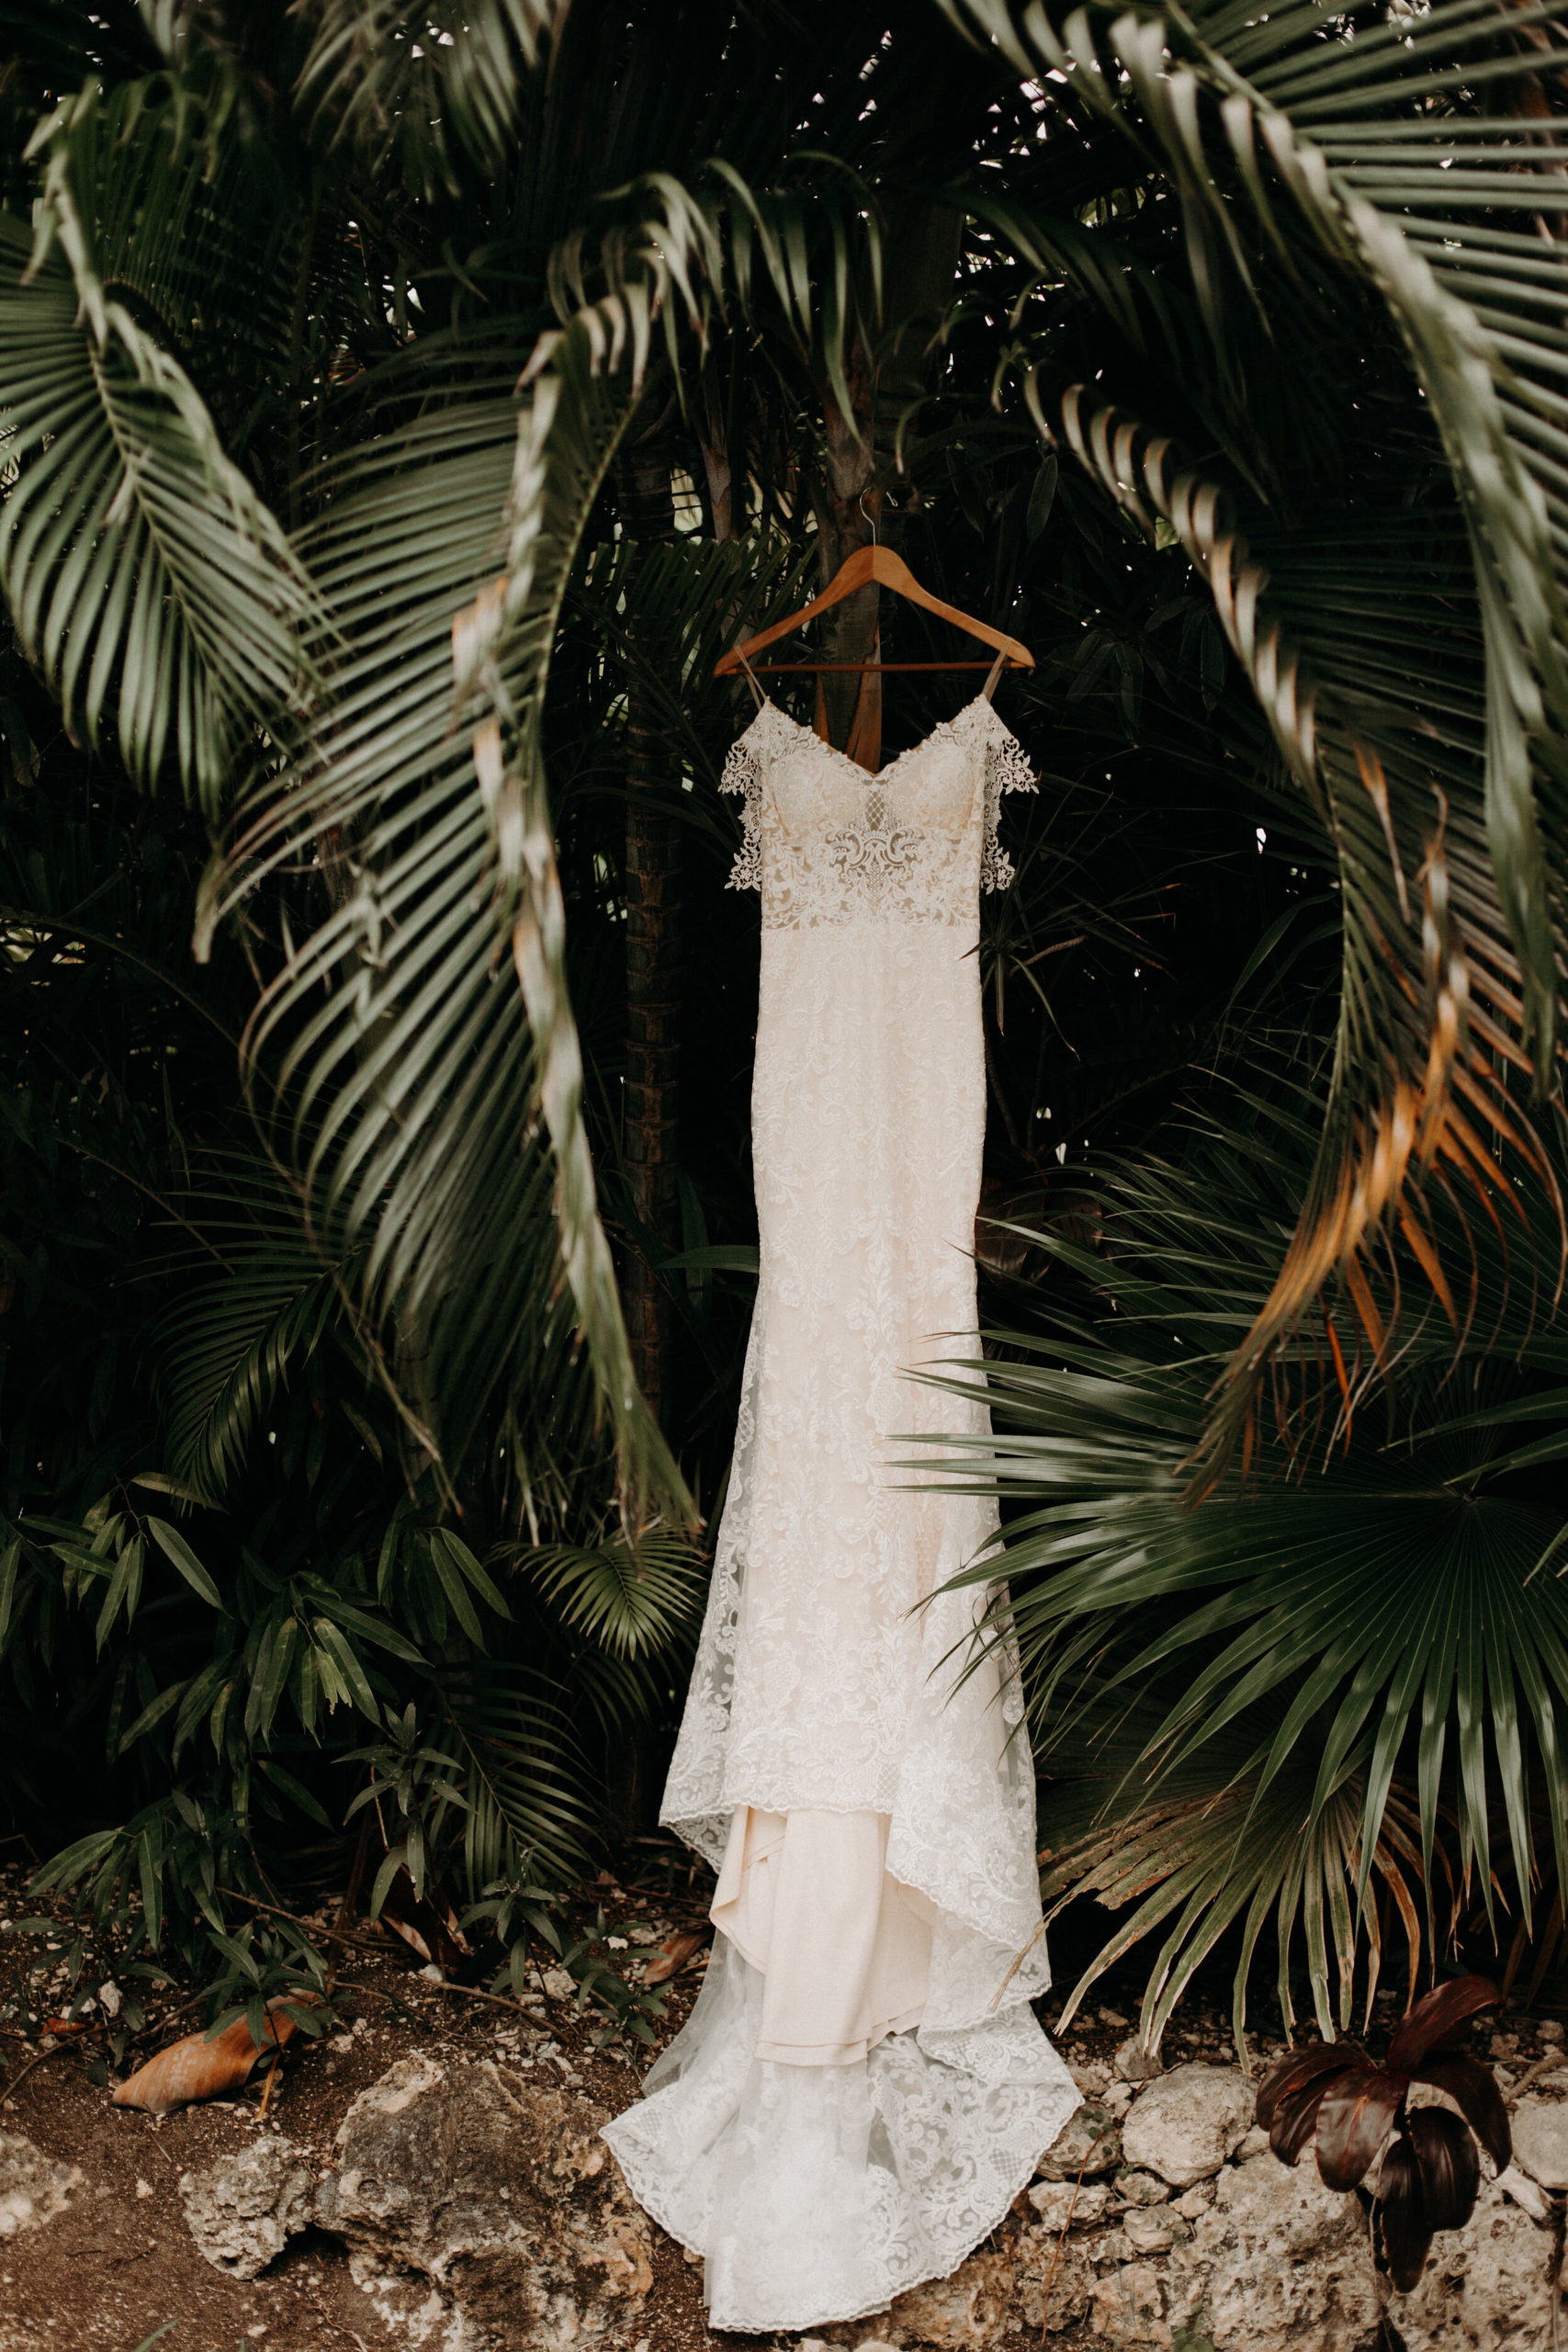 reused lacy boho wedding dress hanging in palm fronds